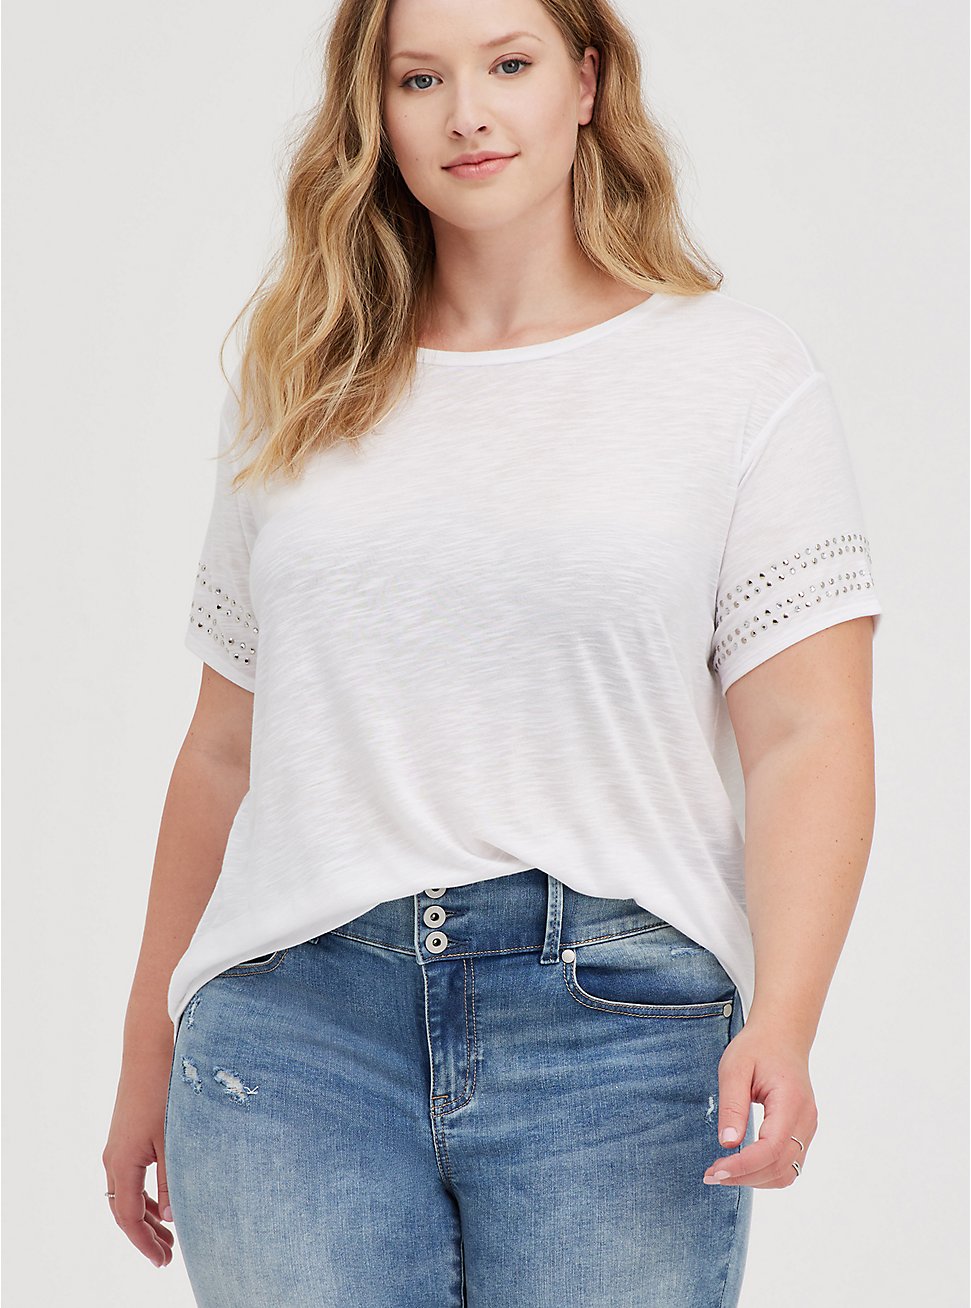 Plus Size Drop Shoulder Studded Tee - White, BRIGHT WHITE, hi-res